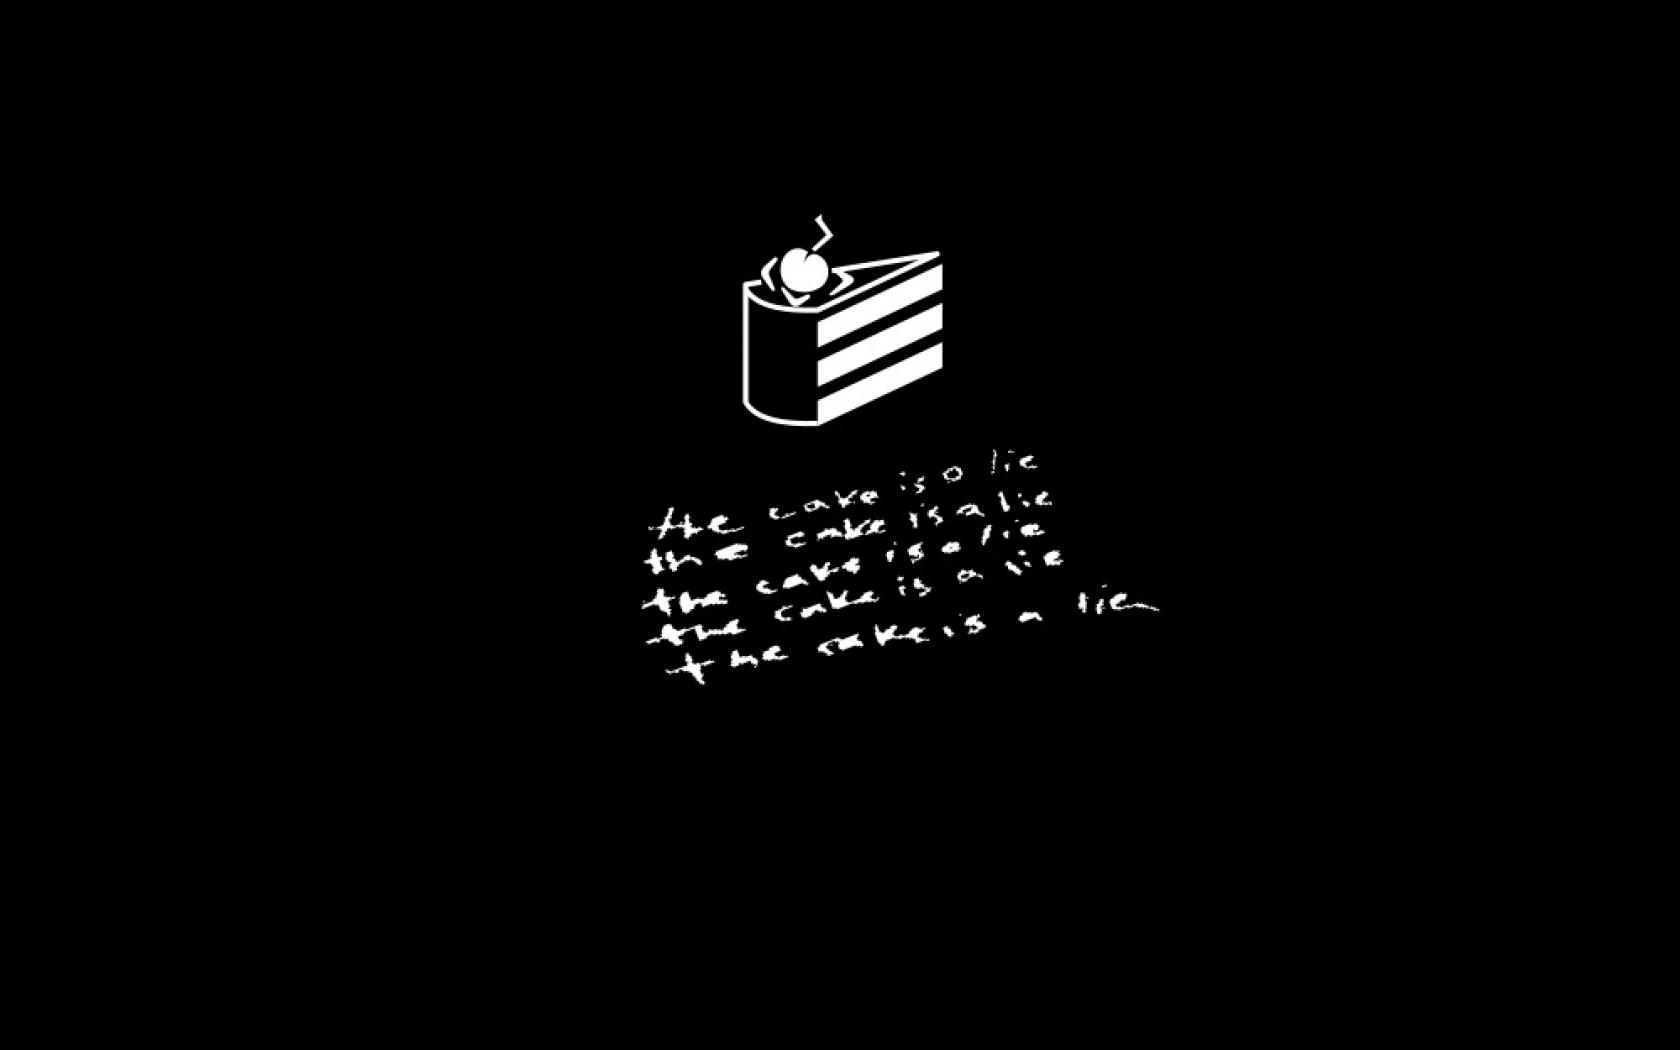 Portal black and white minimalistic text the cake is a lie